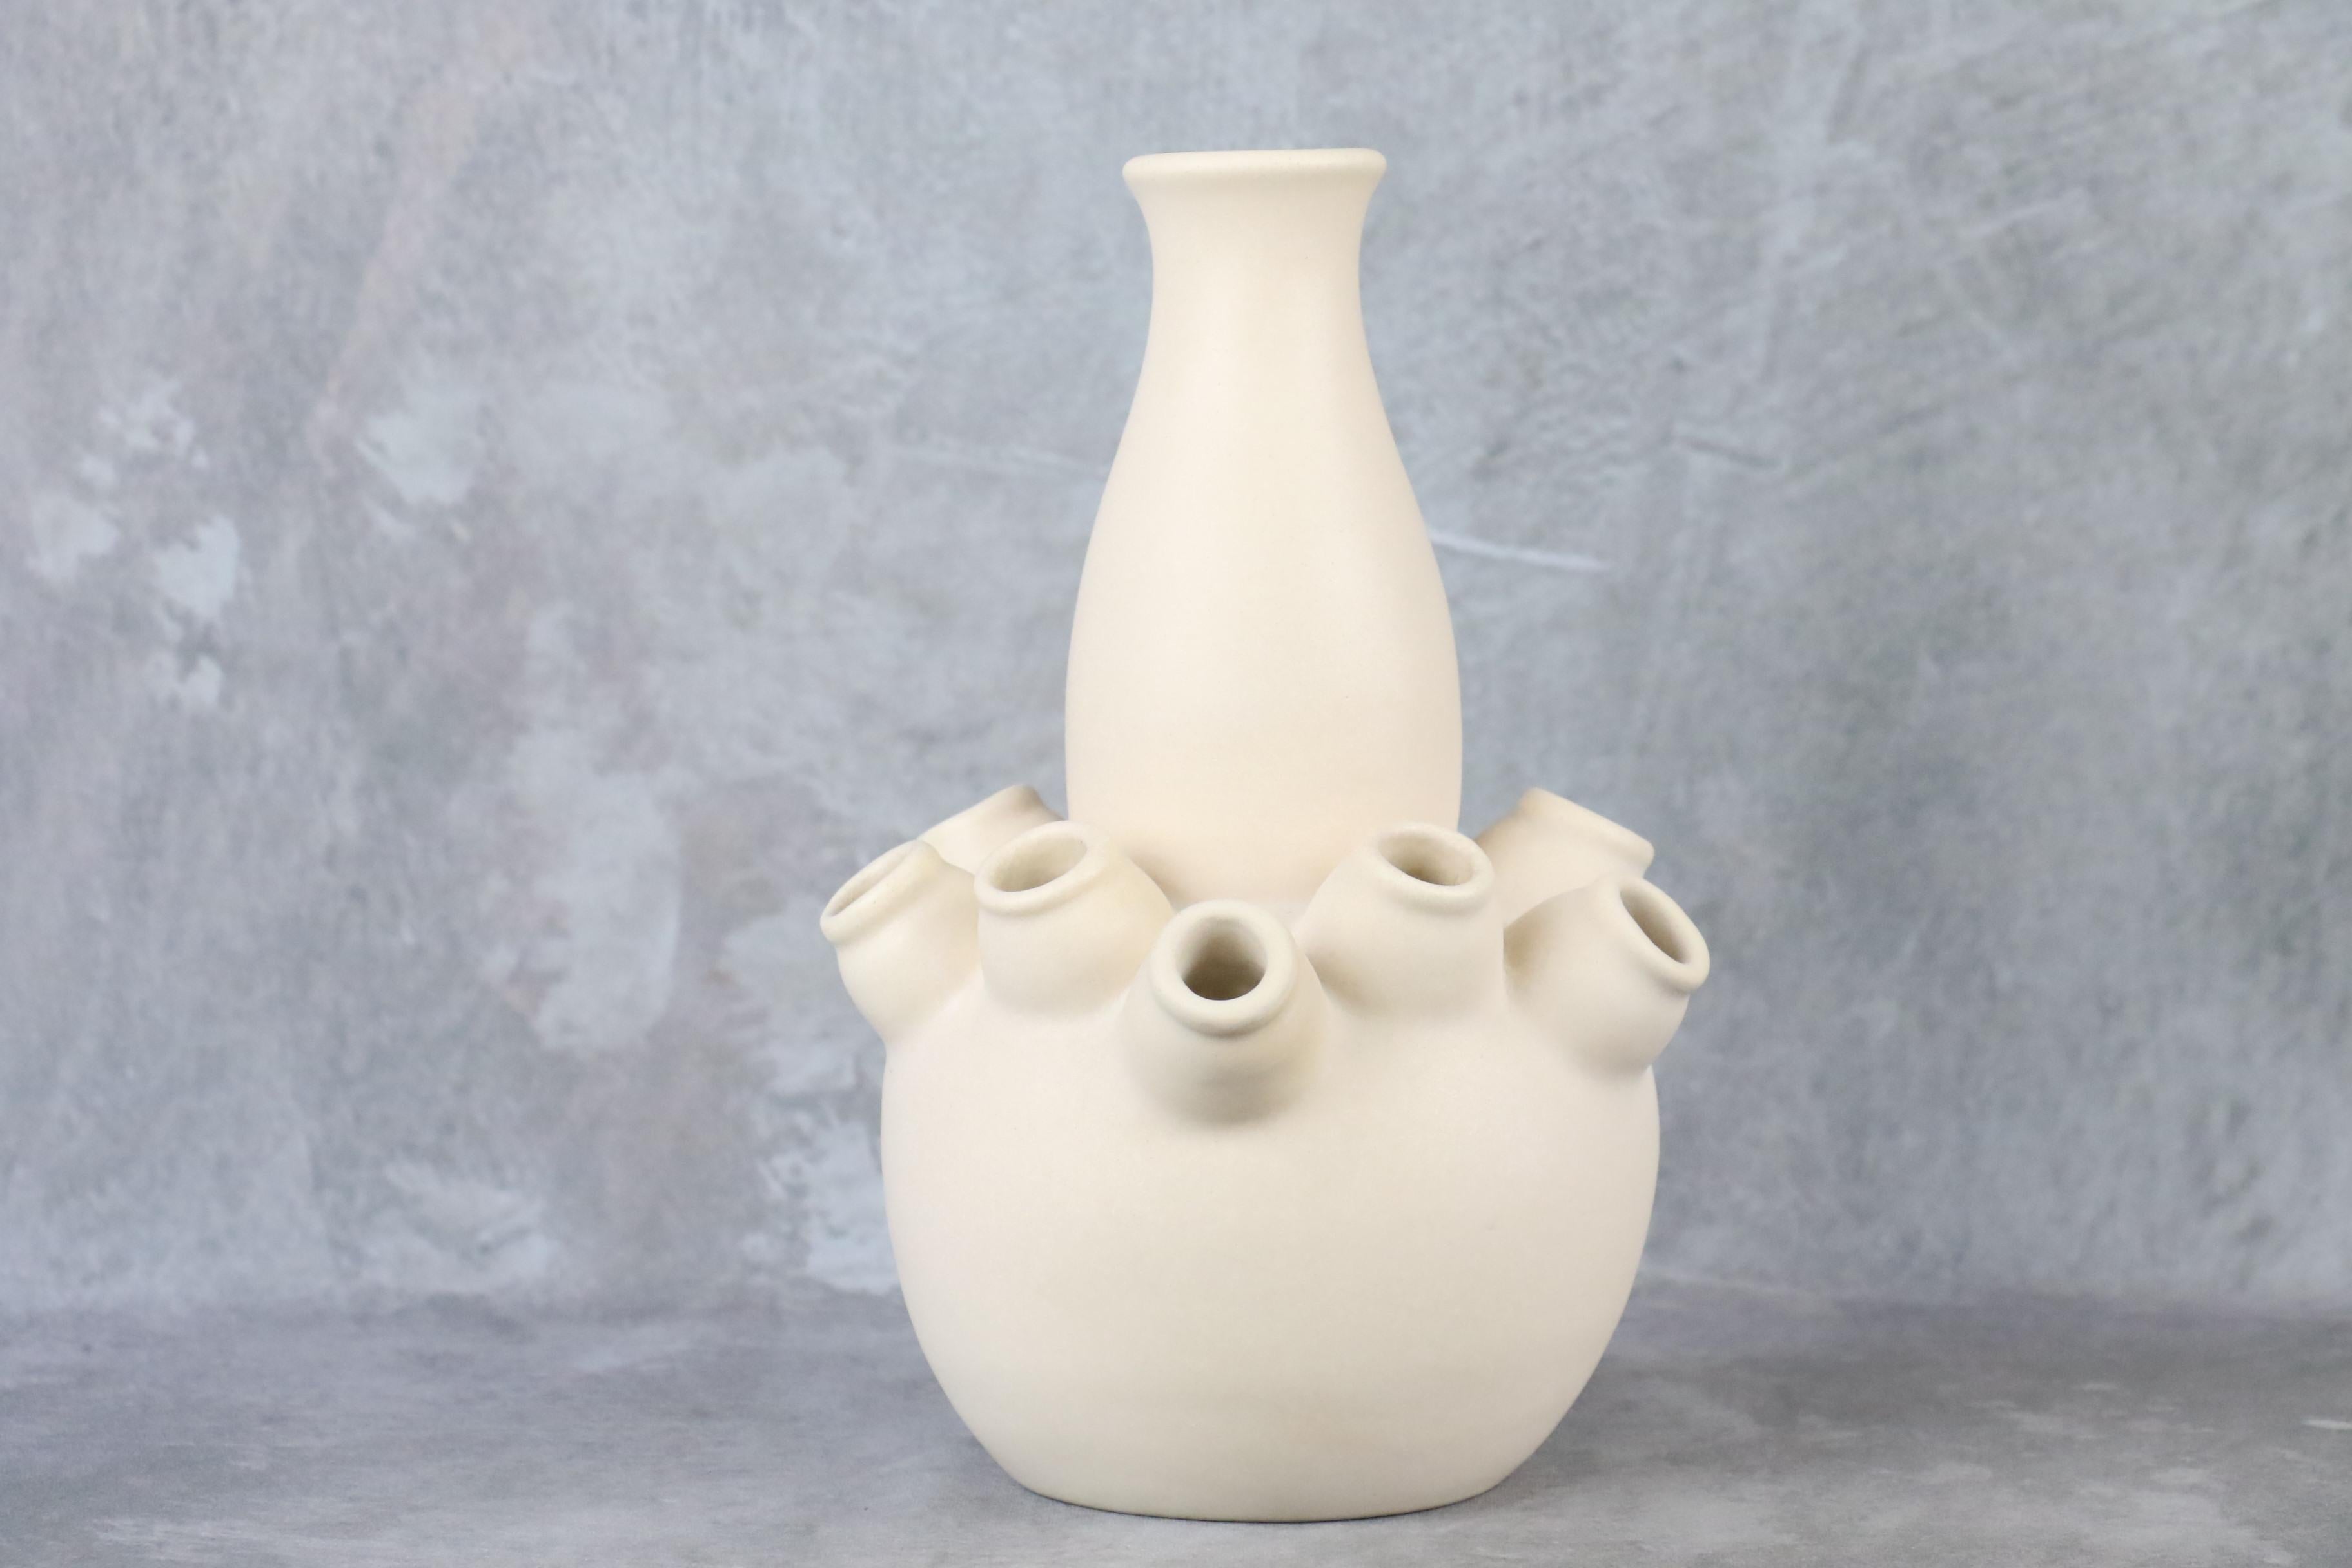 Mid-Century French Ceramic zoomorphic vase by Louis Giraud, Vallauris, 1950s

This is a very original piece, elegant and delicate. The zoomorphic shape is covered in a pure white glaze that is soft to the touch. The monochrome piece is a real